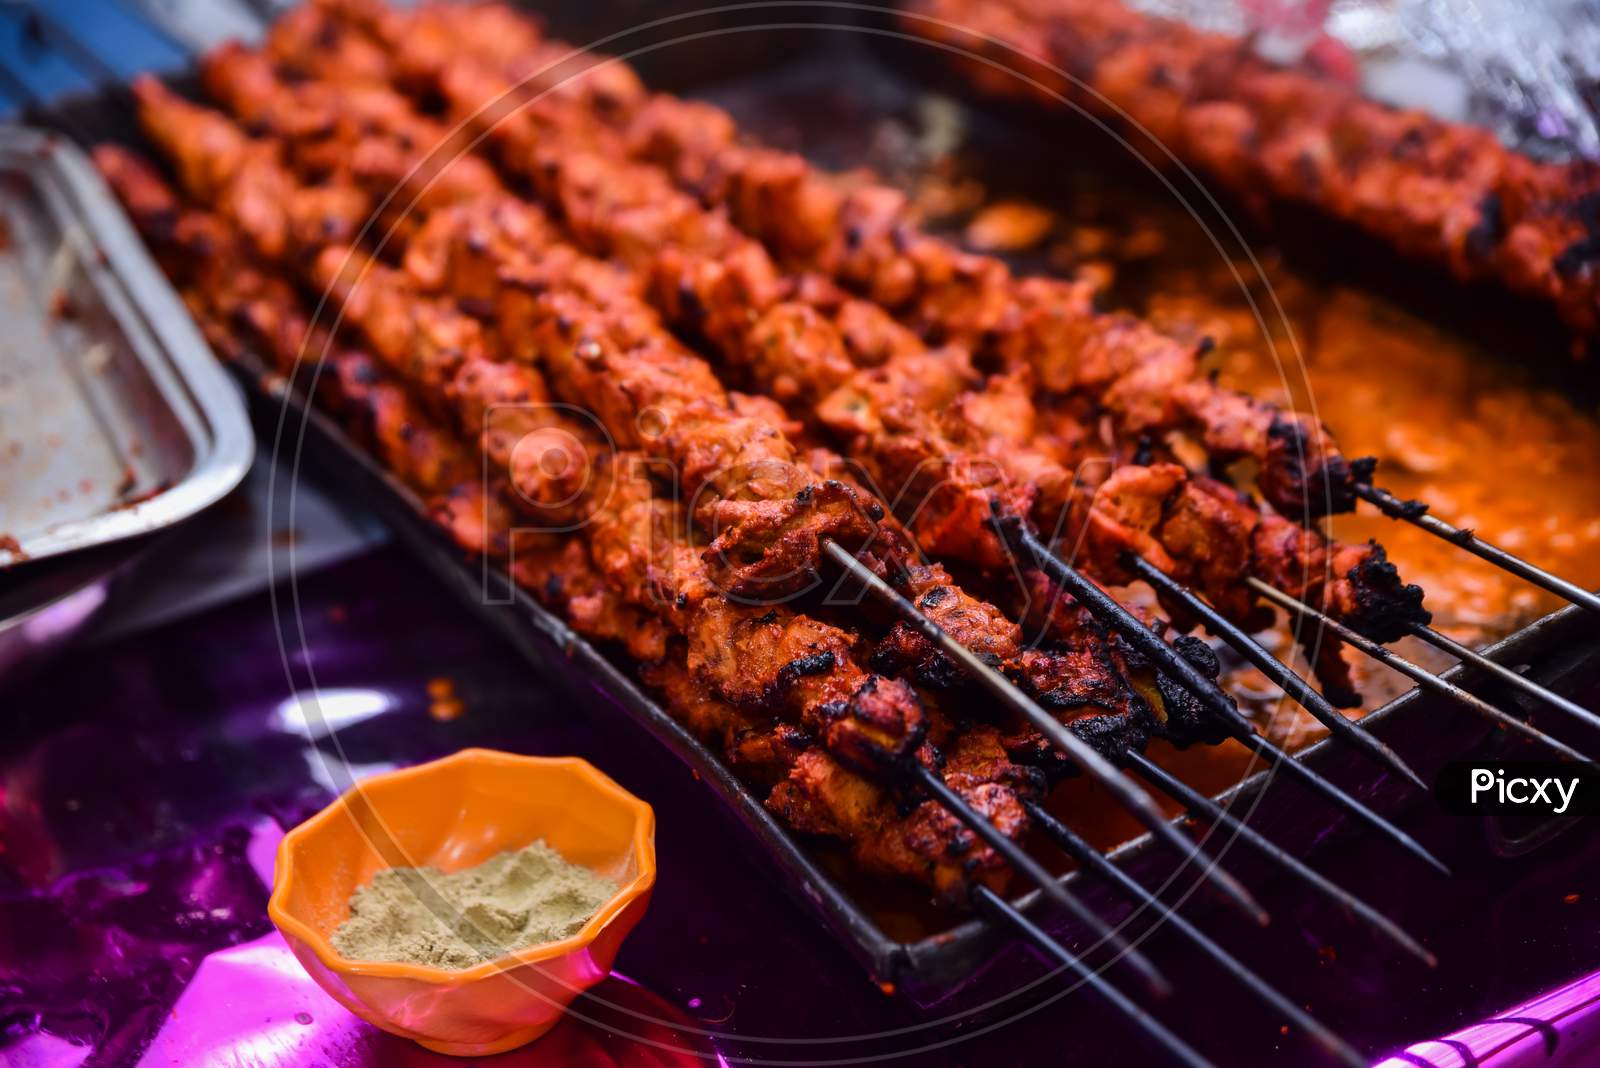 Barbecue Chicken Kebabs On The Hot Grill Close-up. Flames of Fire In The Background